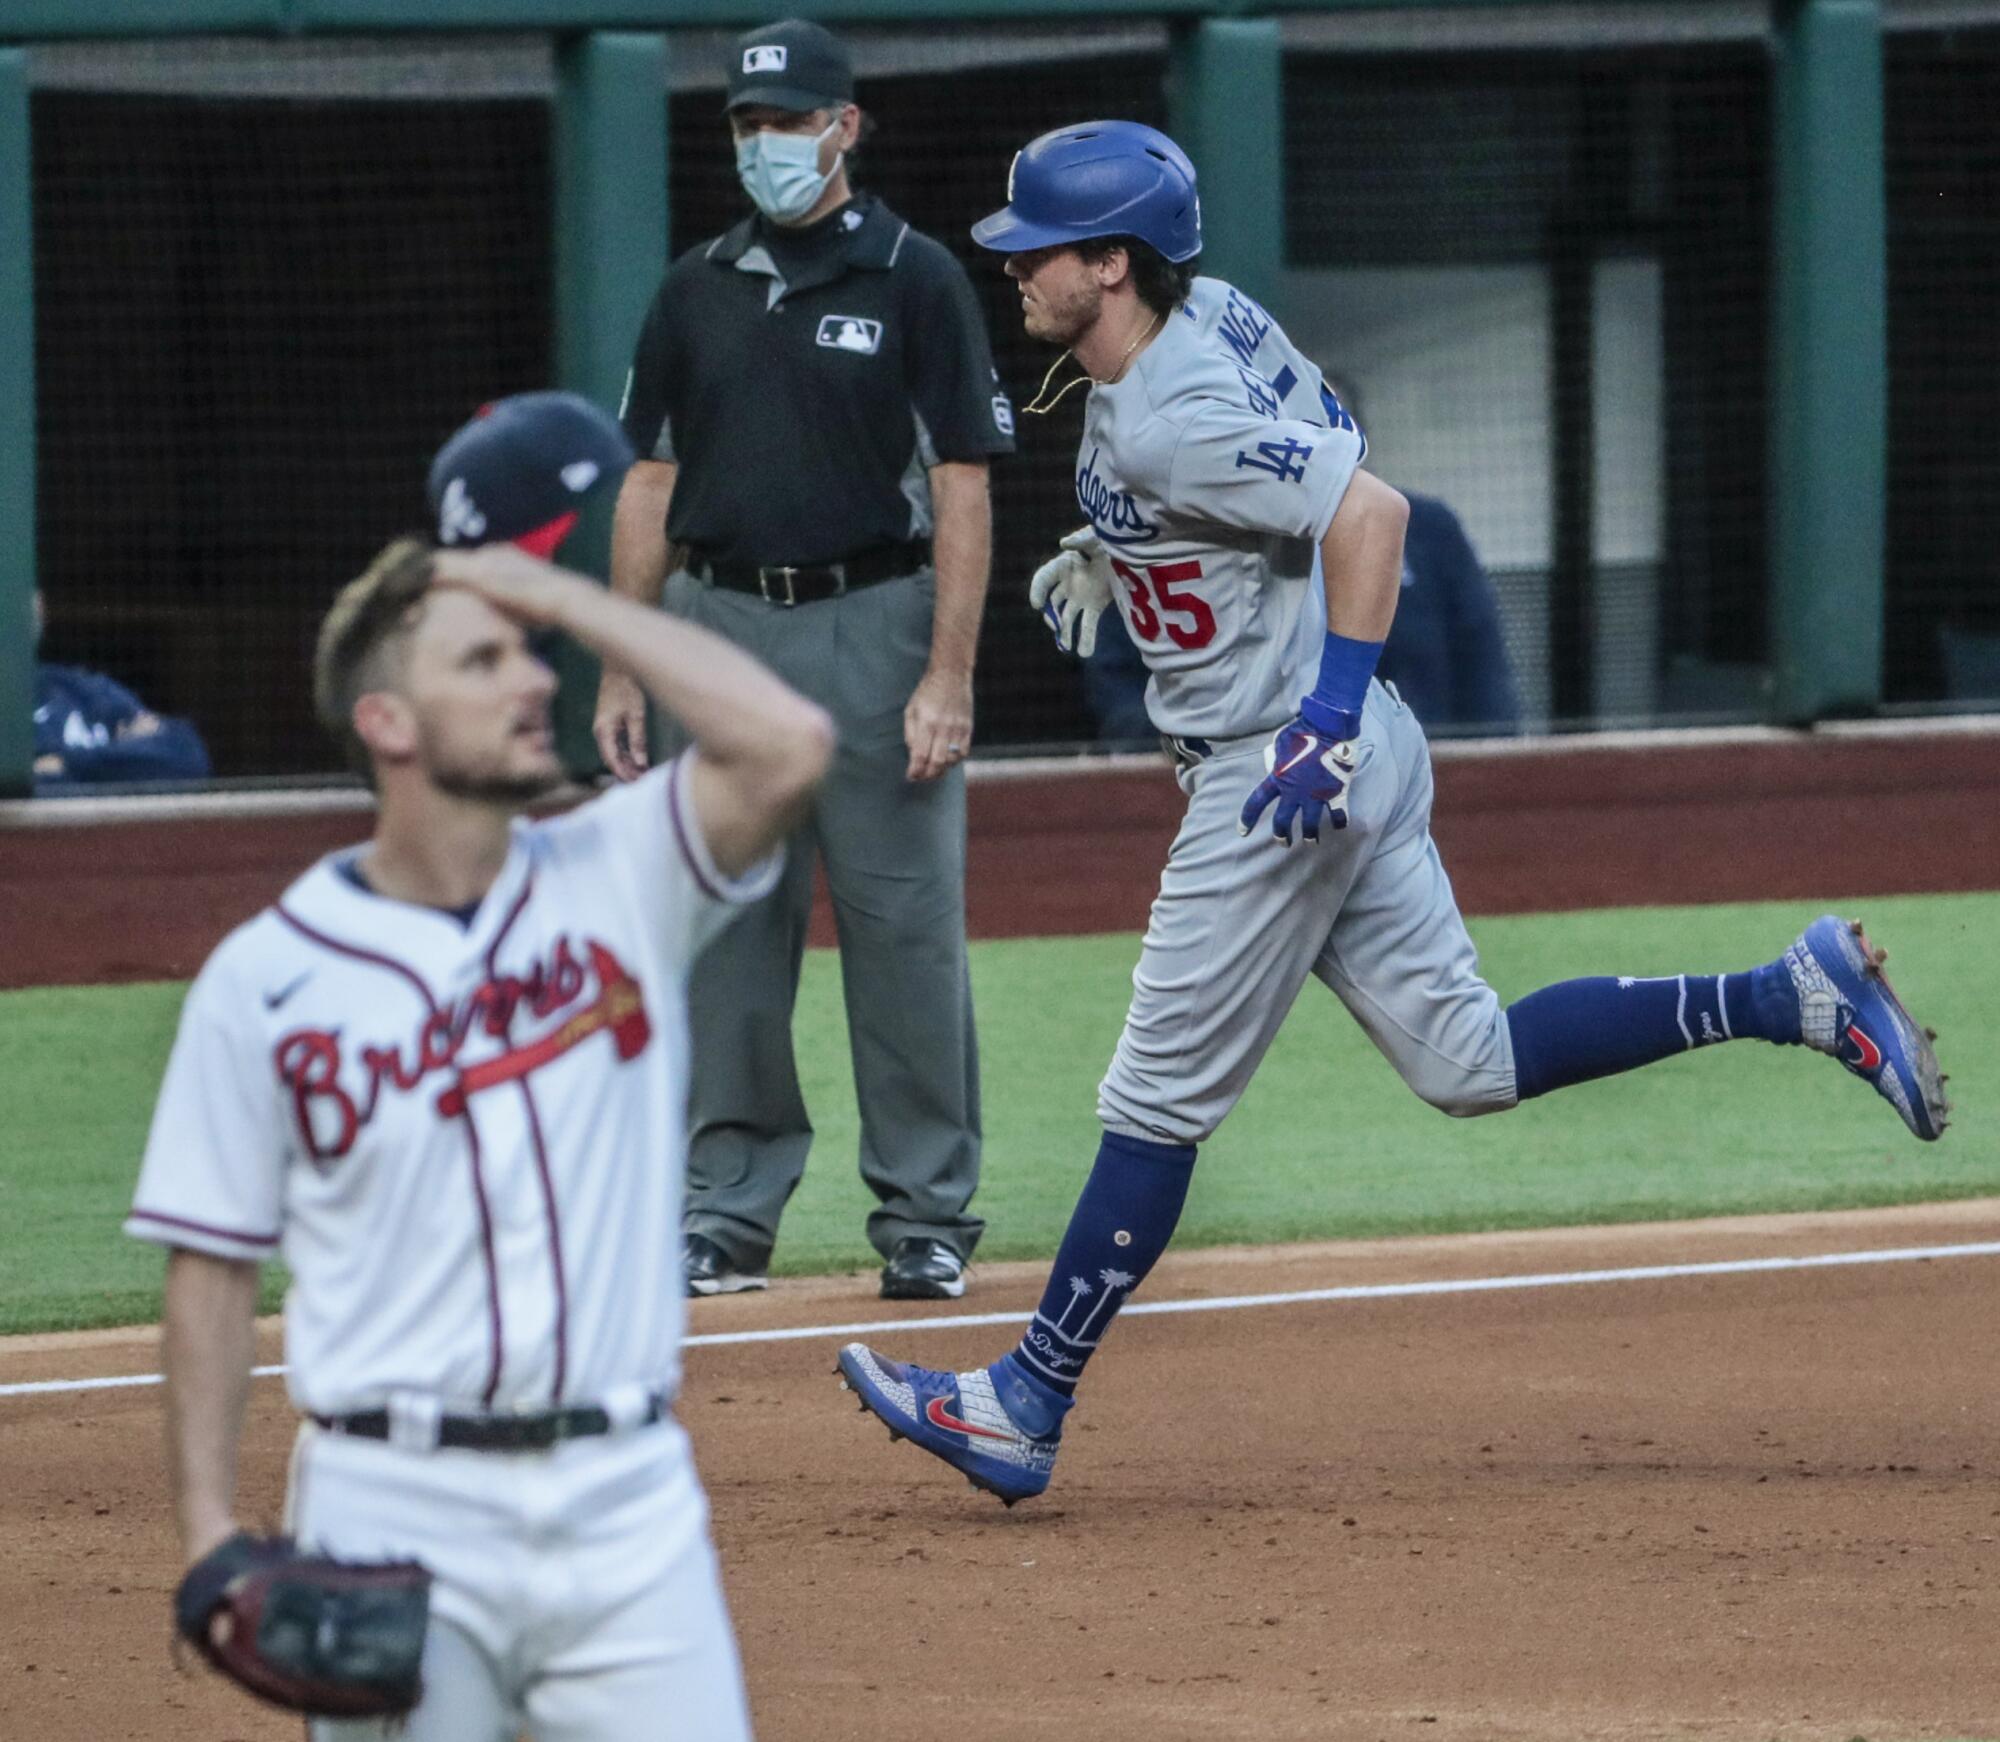 Dodgers center fielder Cody Bellinger circles the bases after hitting a home run off Braves relief pitcher Grant Dayton.